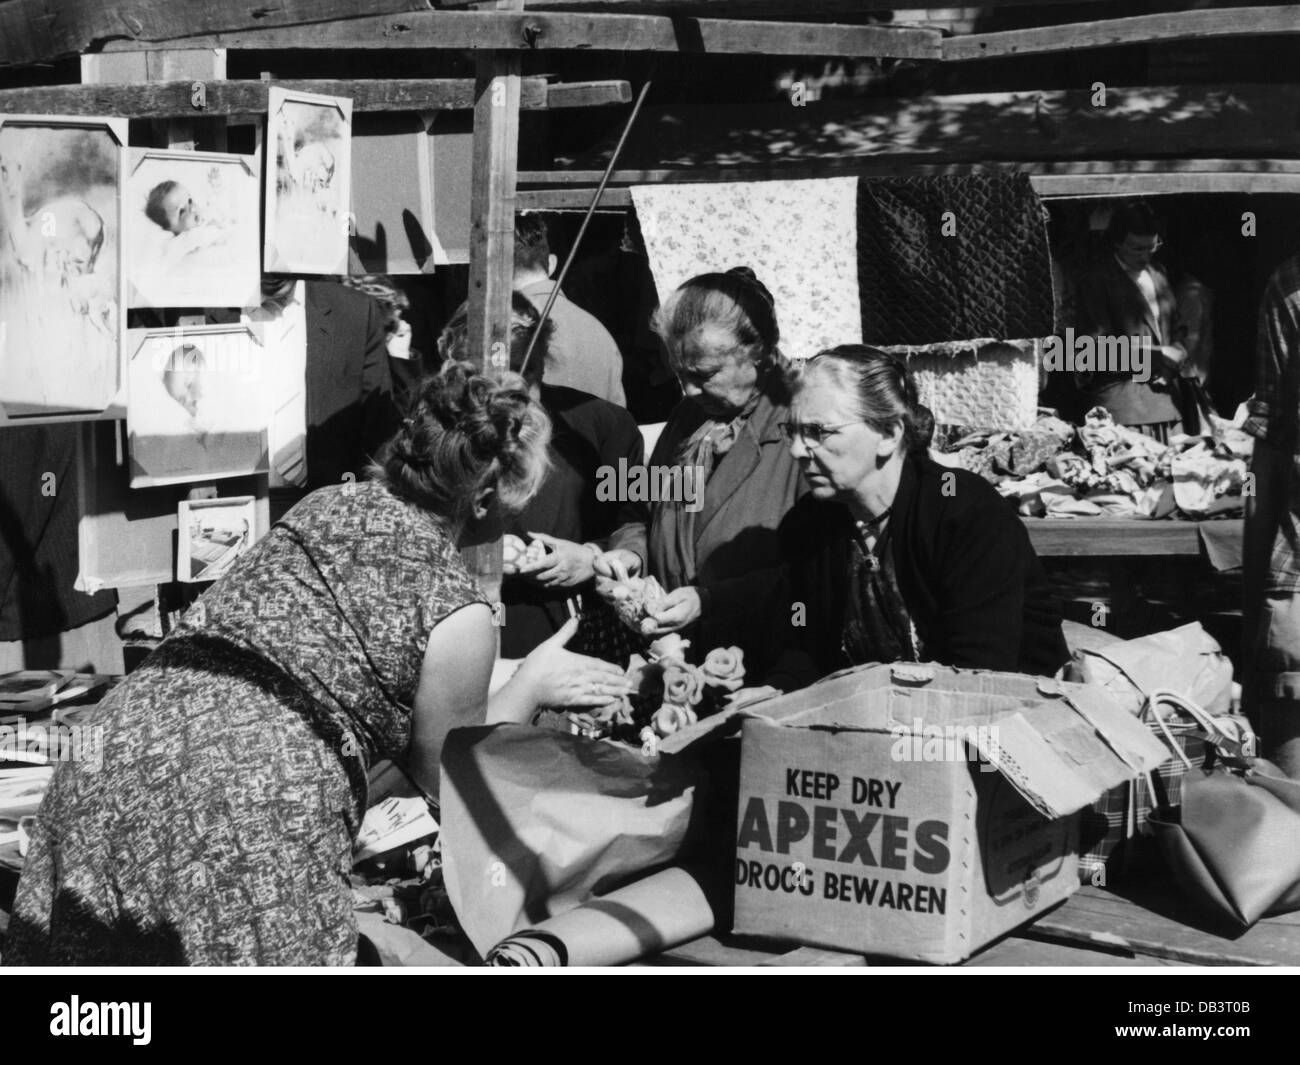 trade, markets, traffic, flea market in Zwolle, Netherlands, 1950s, Additional-Rights-Clearences-Not Available Stock Photo